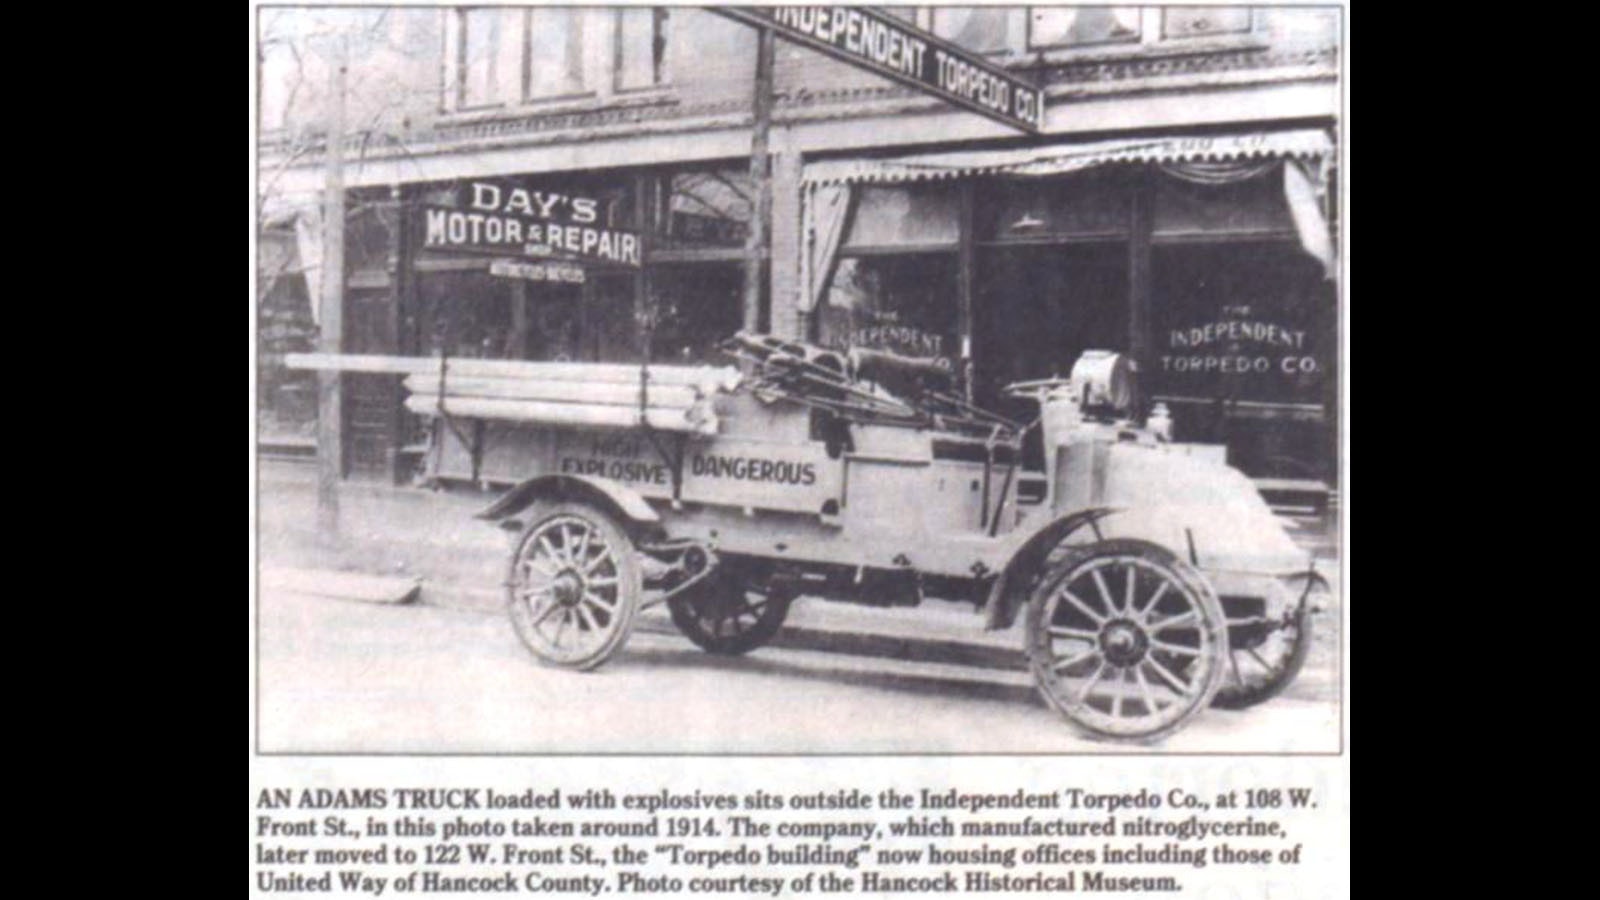 A newspaper clipping shows an Independent Torpedo Co. clearly makes it's carrying "explosives."